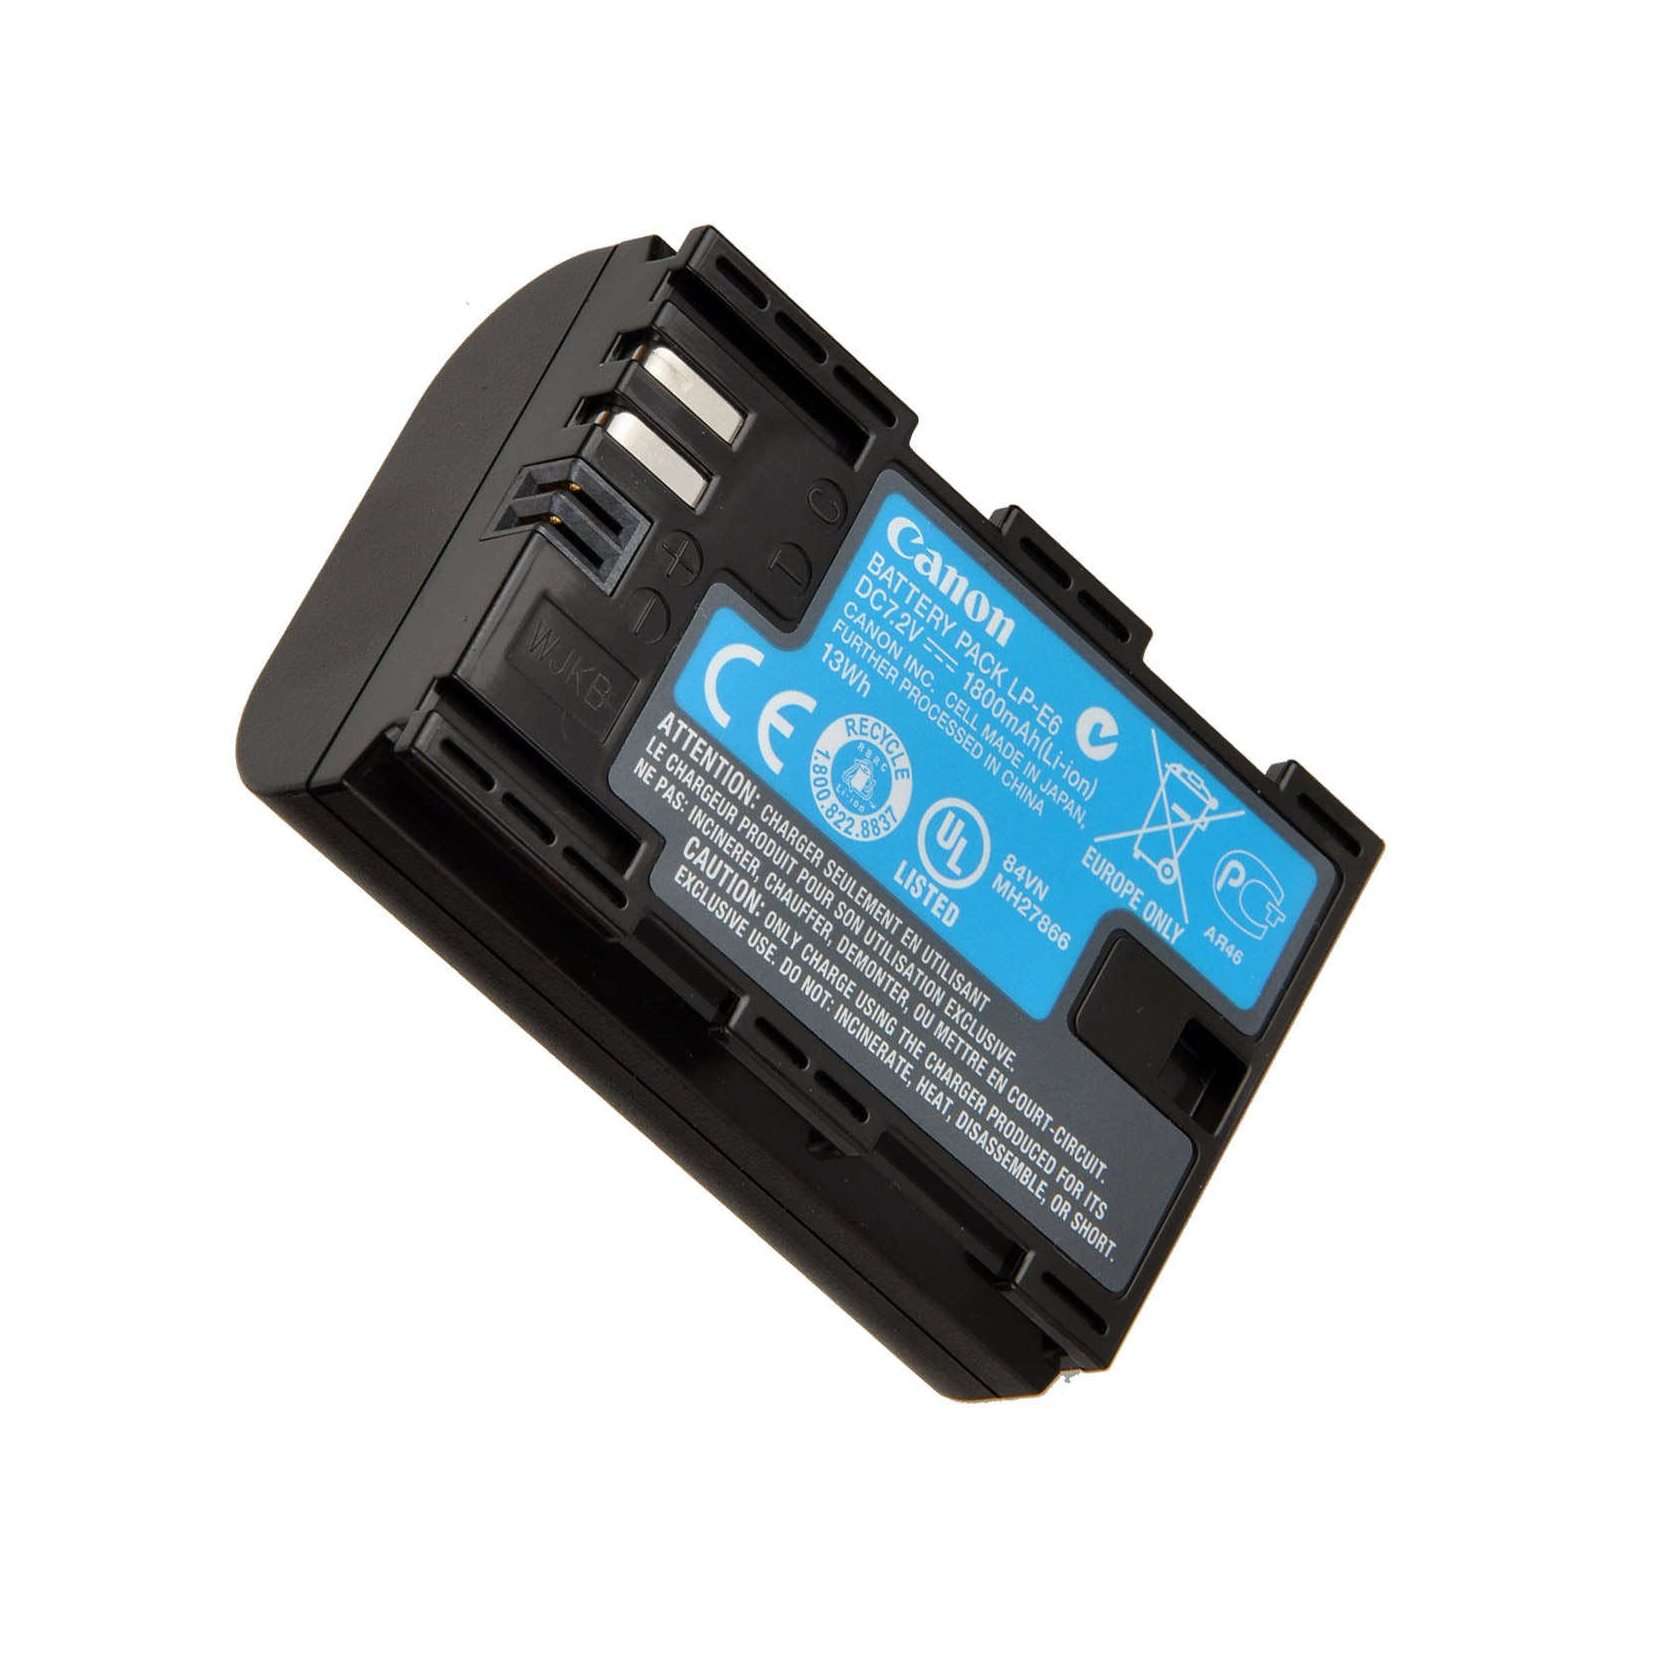 Canon battery. Canon LP-e6. LP-e6 и LP-e6n. Аккумулятор Кэнон 6д. Lpe5 Battery Canon.